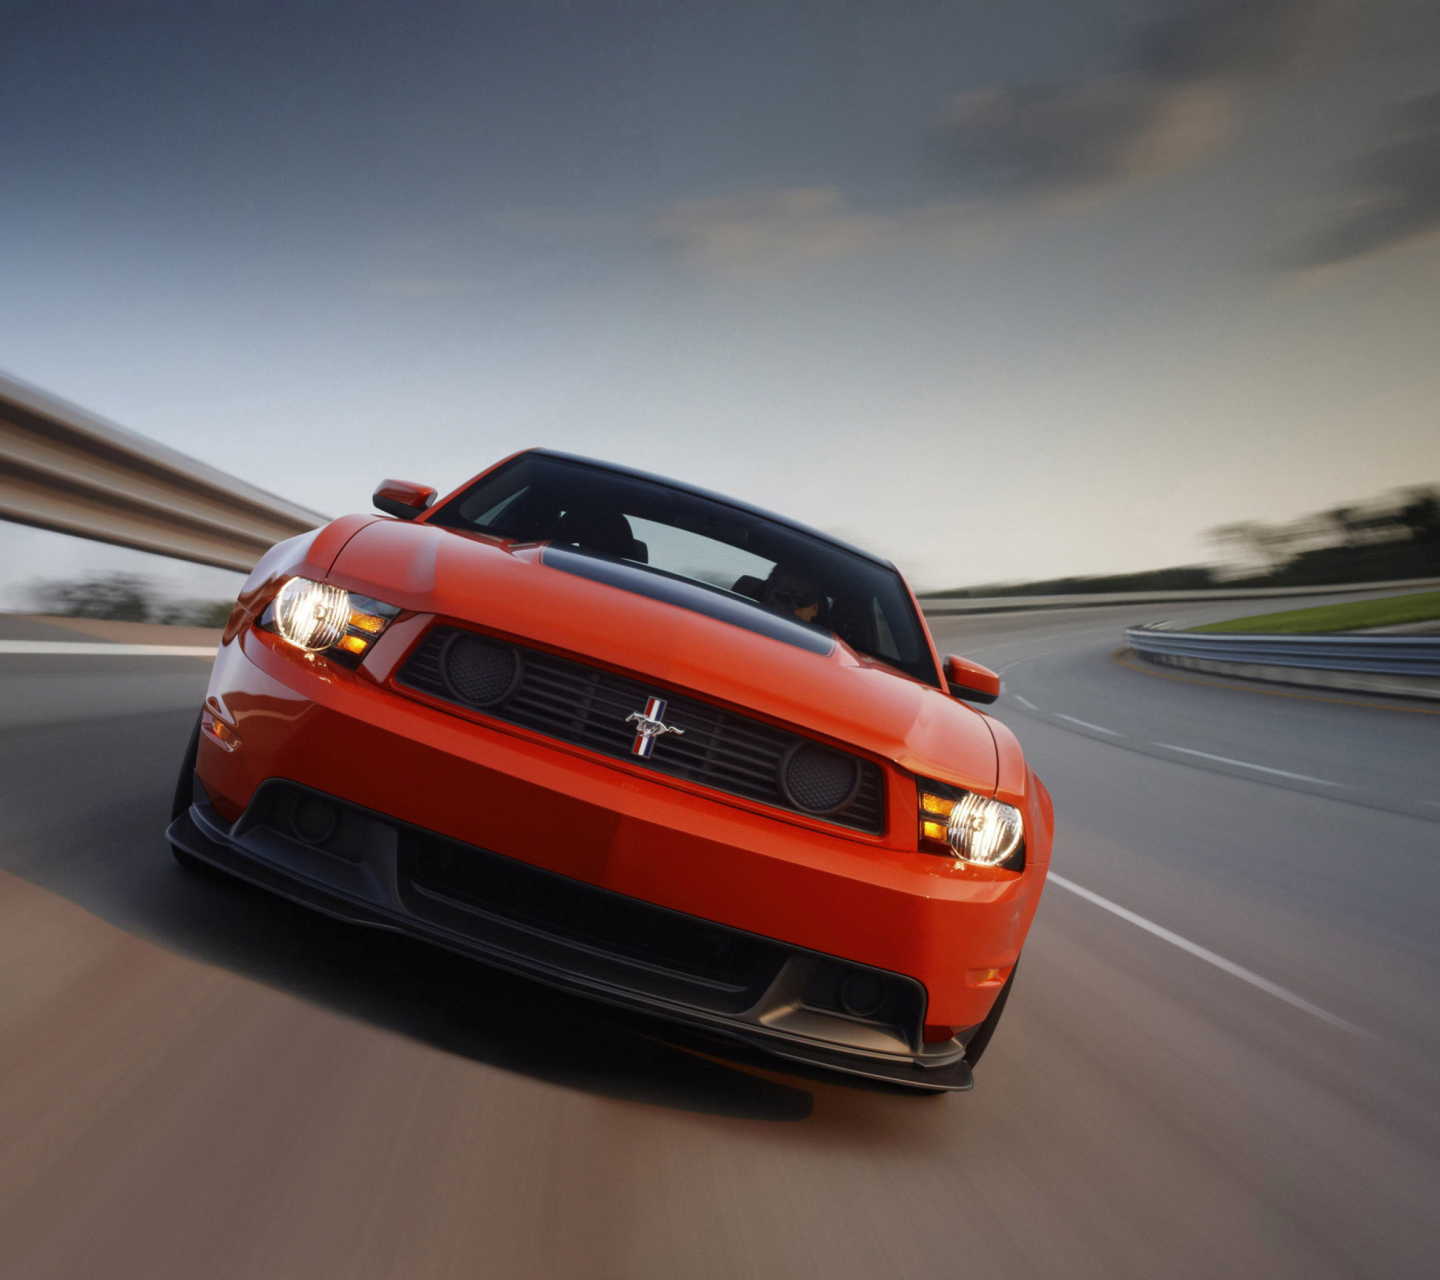 Red Cars Ford Mustang wallpaper 1440x1280